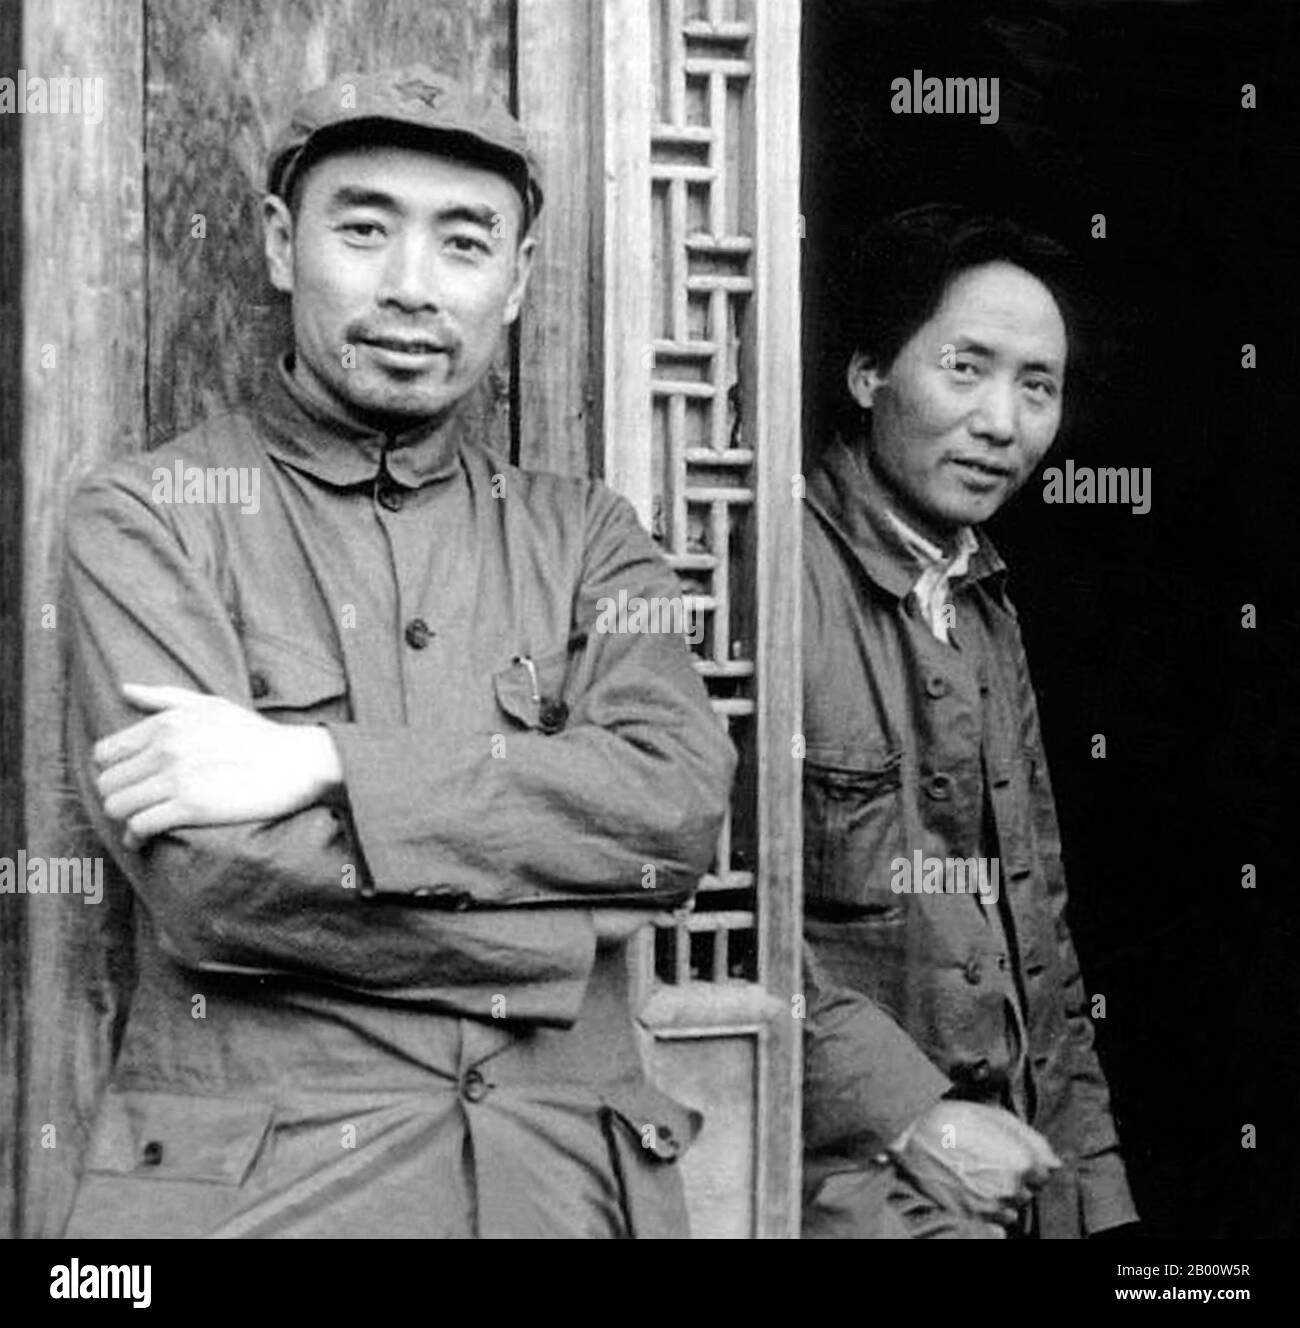 China: Relaxed Zhou Enlai (left) and Mao Zedong at the Chinese Communist capital of Yan'an, c. 1936. Photograph by US journalist Edgar Snow.  Mao Zedong, also transliterated as Mao Tse-tung (26 December 1893 – 9 September 1976), was a Chinese communist revolutionary, guerrilla warfare strategist, author, political theorist, and leader of the Chinese Revolution. Commonly referred to as Chairman Mao, he was the architect of the People's Republic of China (PRC) from its establishment in 1949, and held authoritarian control over the nation until his death in 1976. Stock Photo